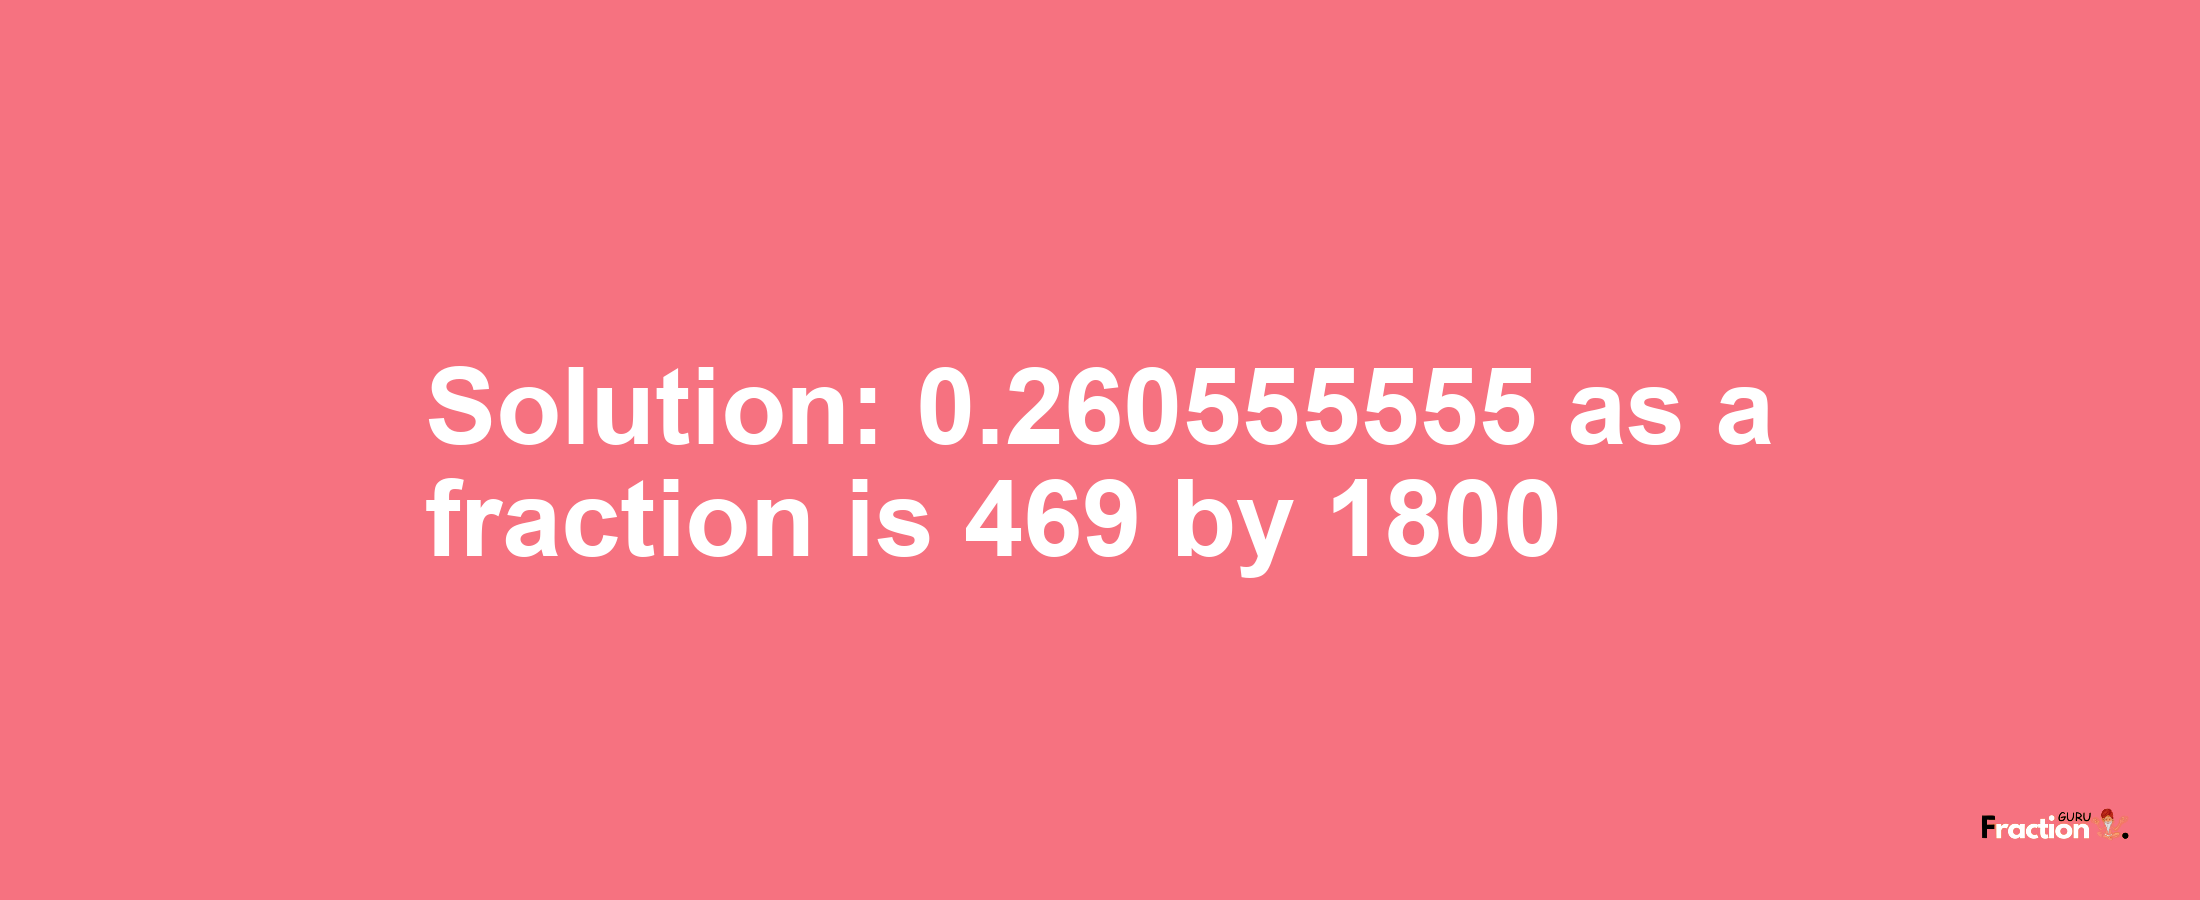 Solution:0.260555555 as a fraction is 469/1800